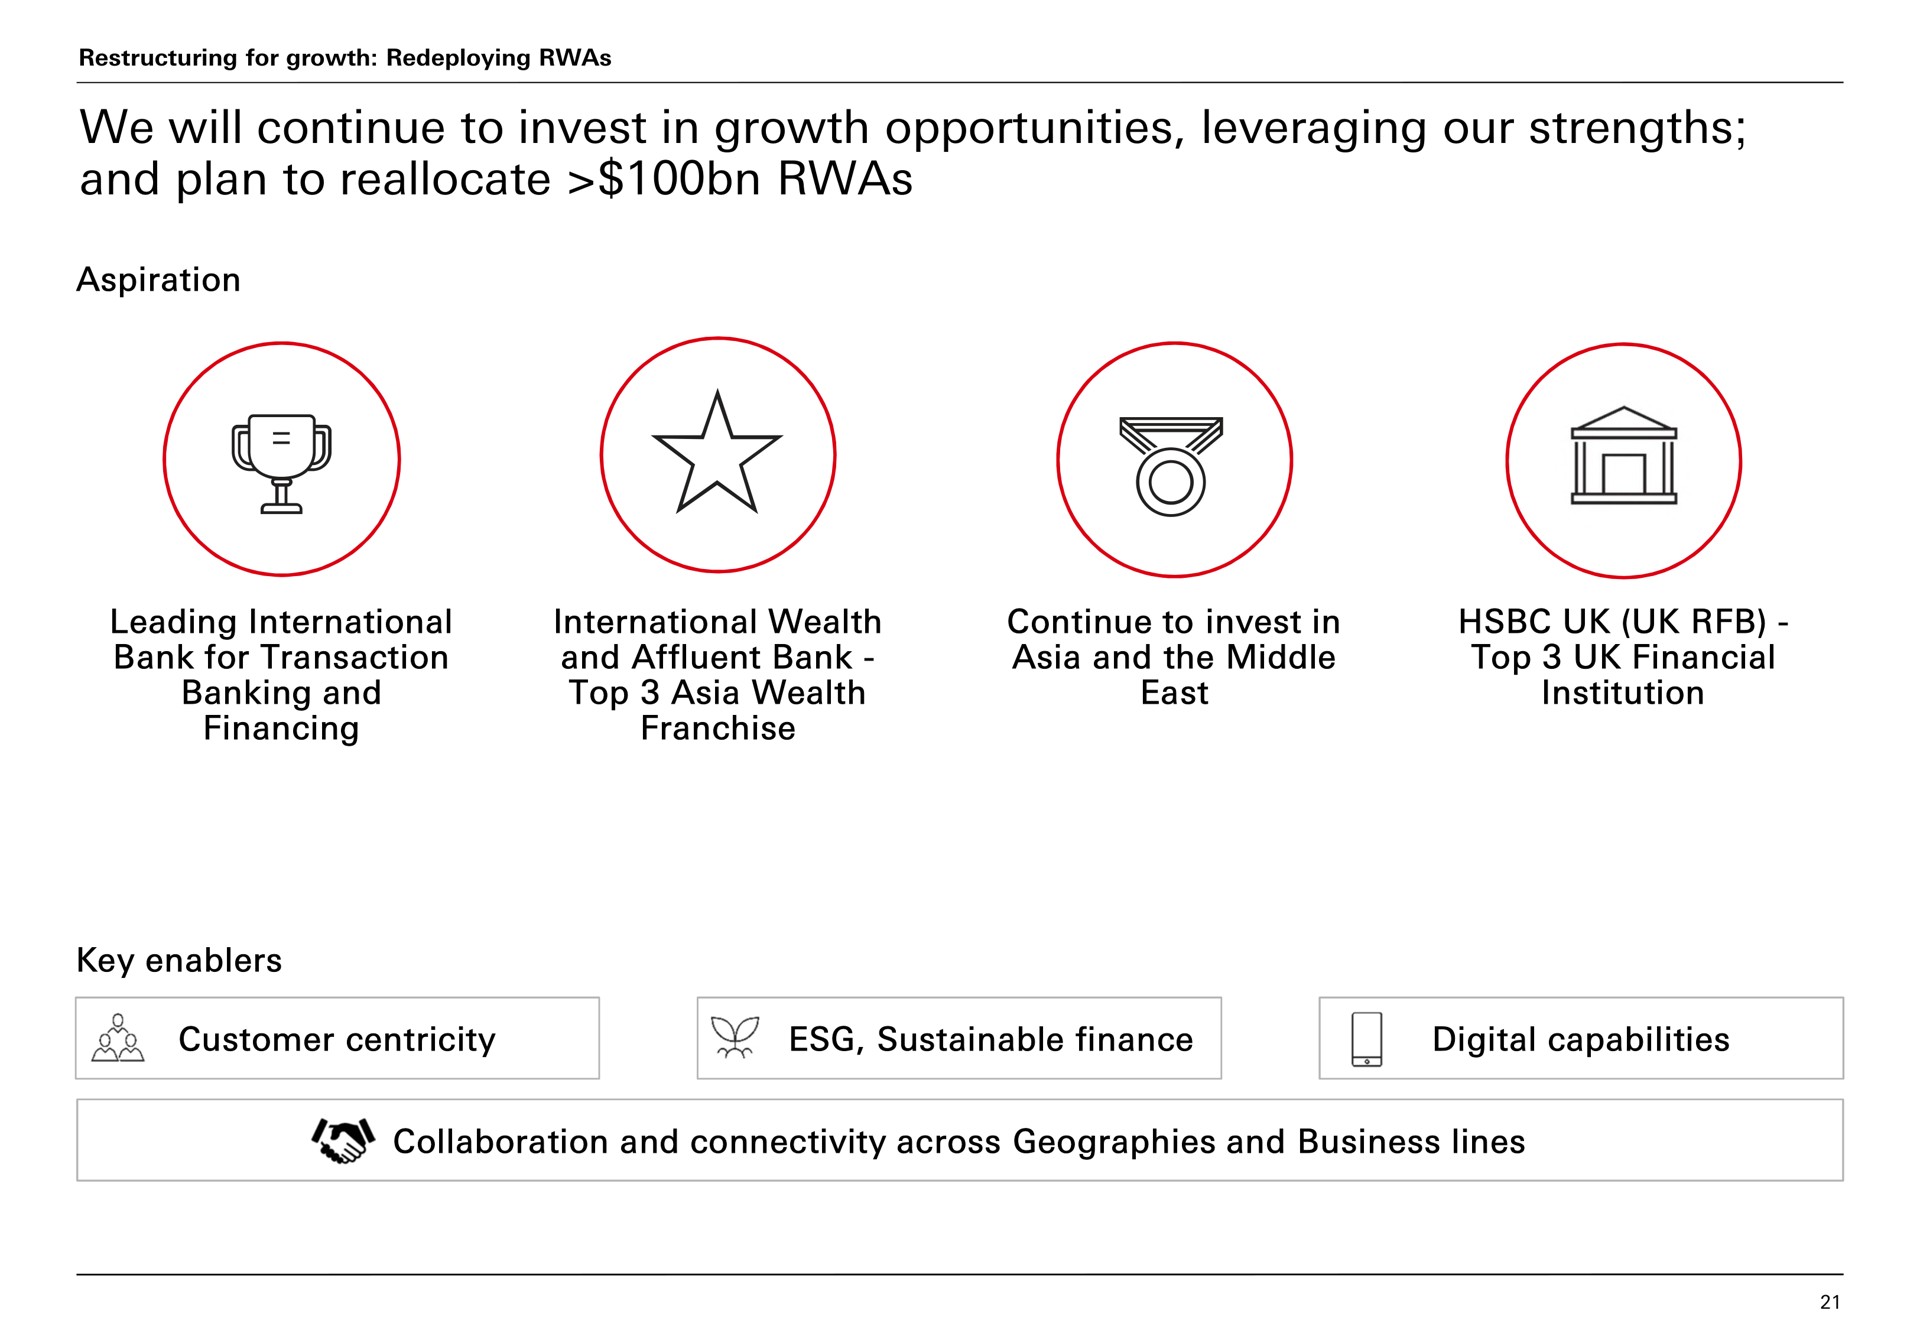 we will continue to invest in growth opportunities leveraging our strengths and plan to reallocate i digital capabilities | HSBC